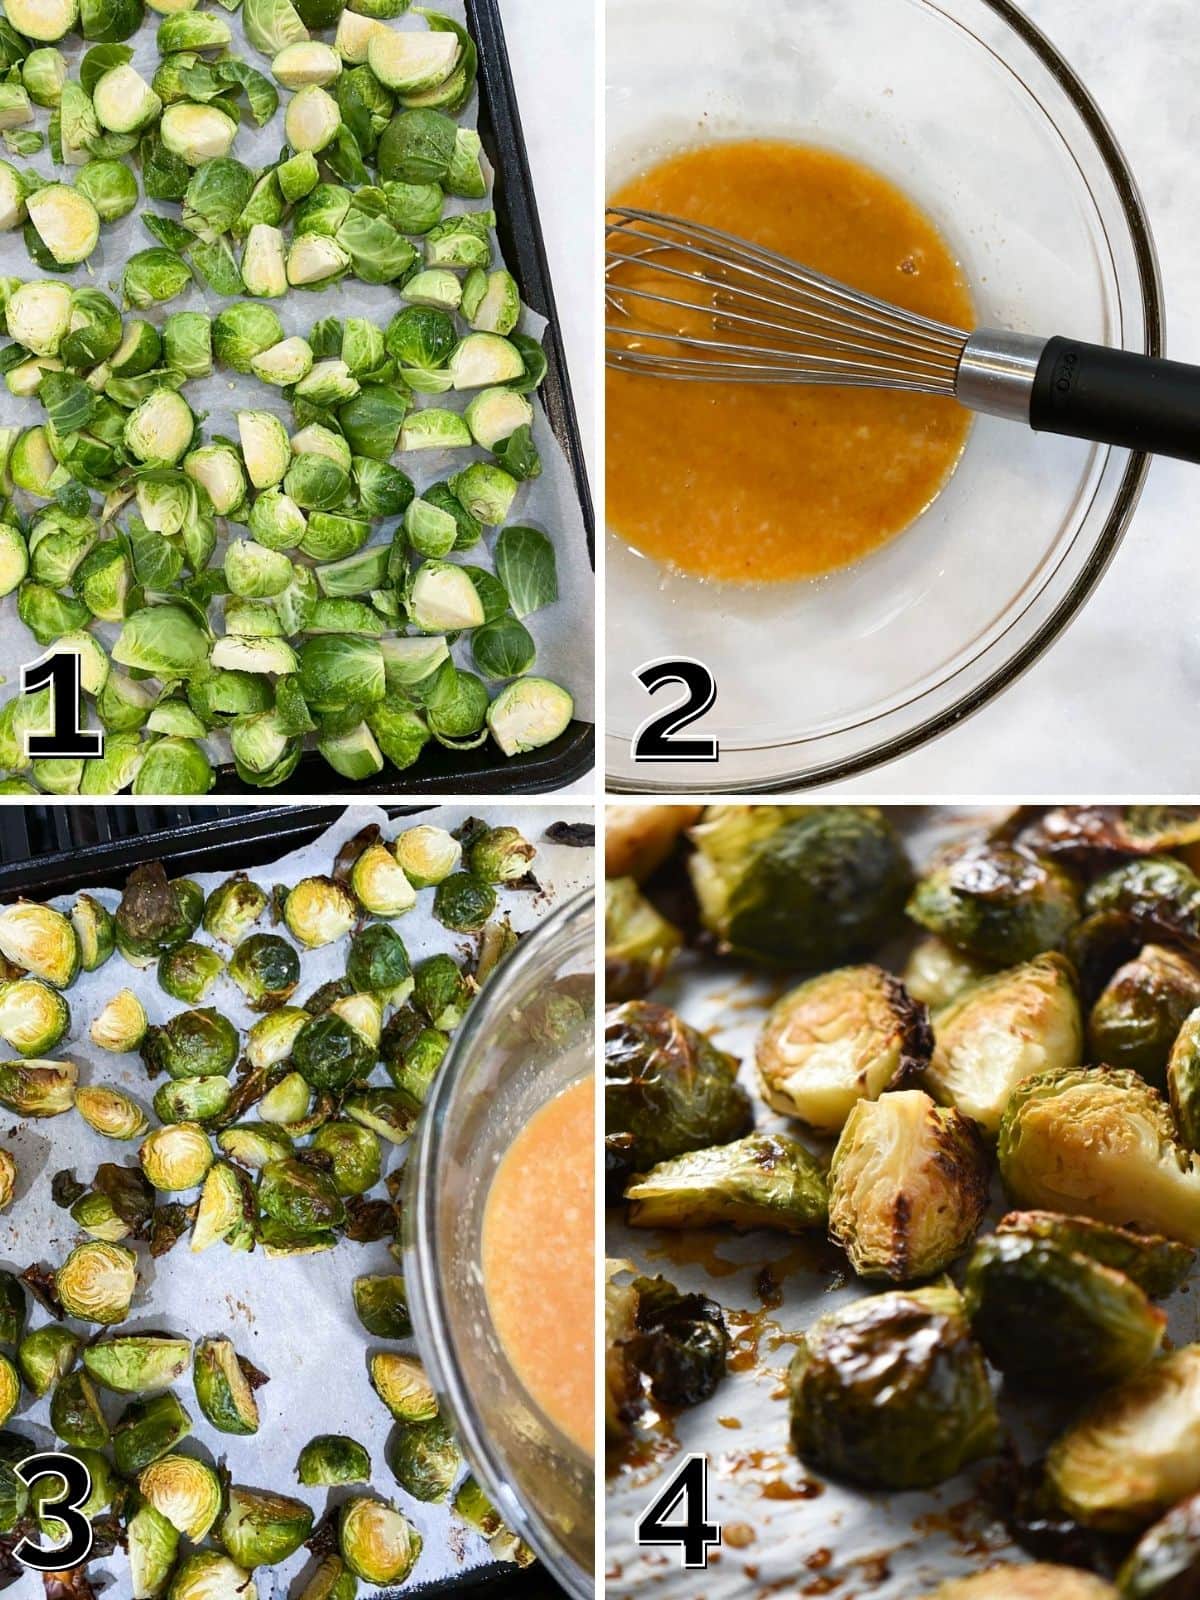 Step by step grid for roasting brussels sprouts, making bang bang sauce, and tossing with sprouts